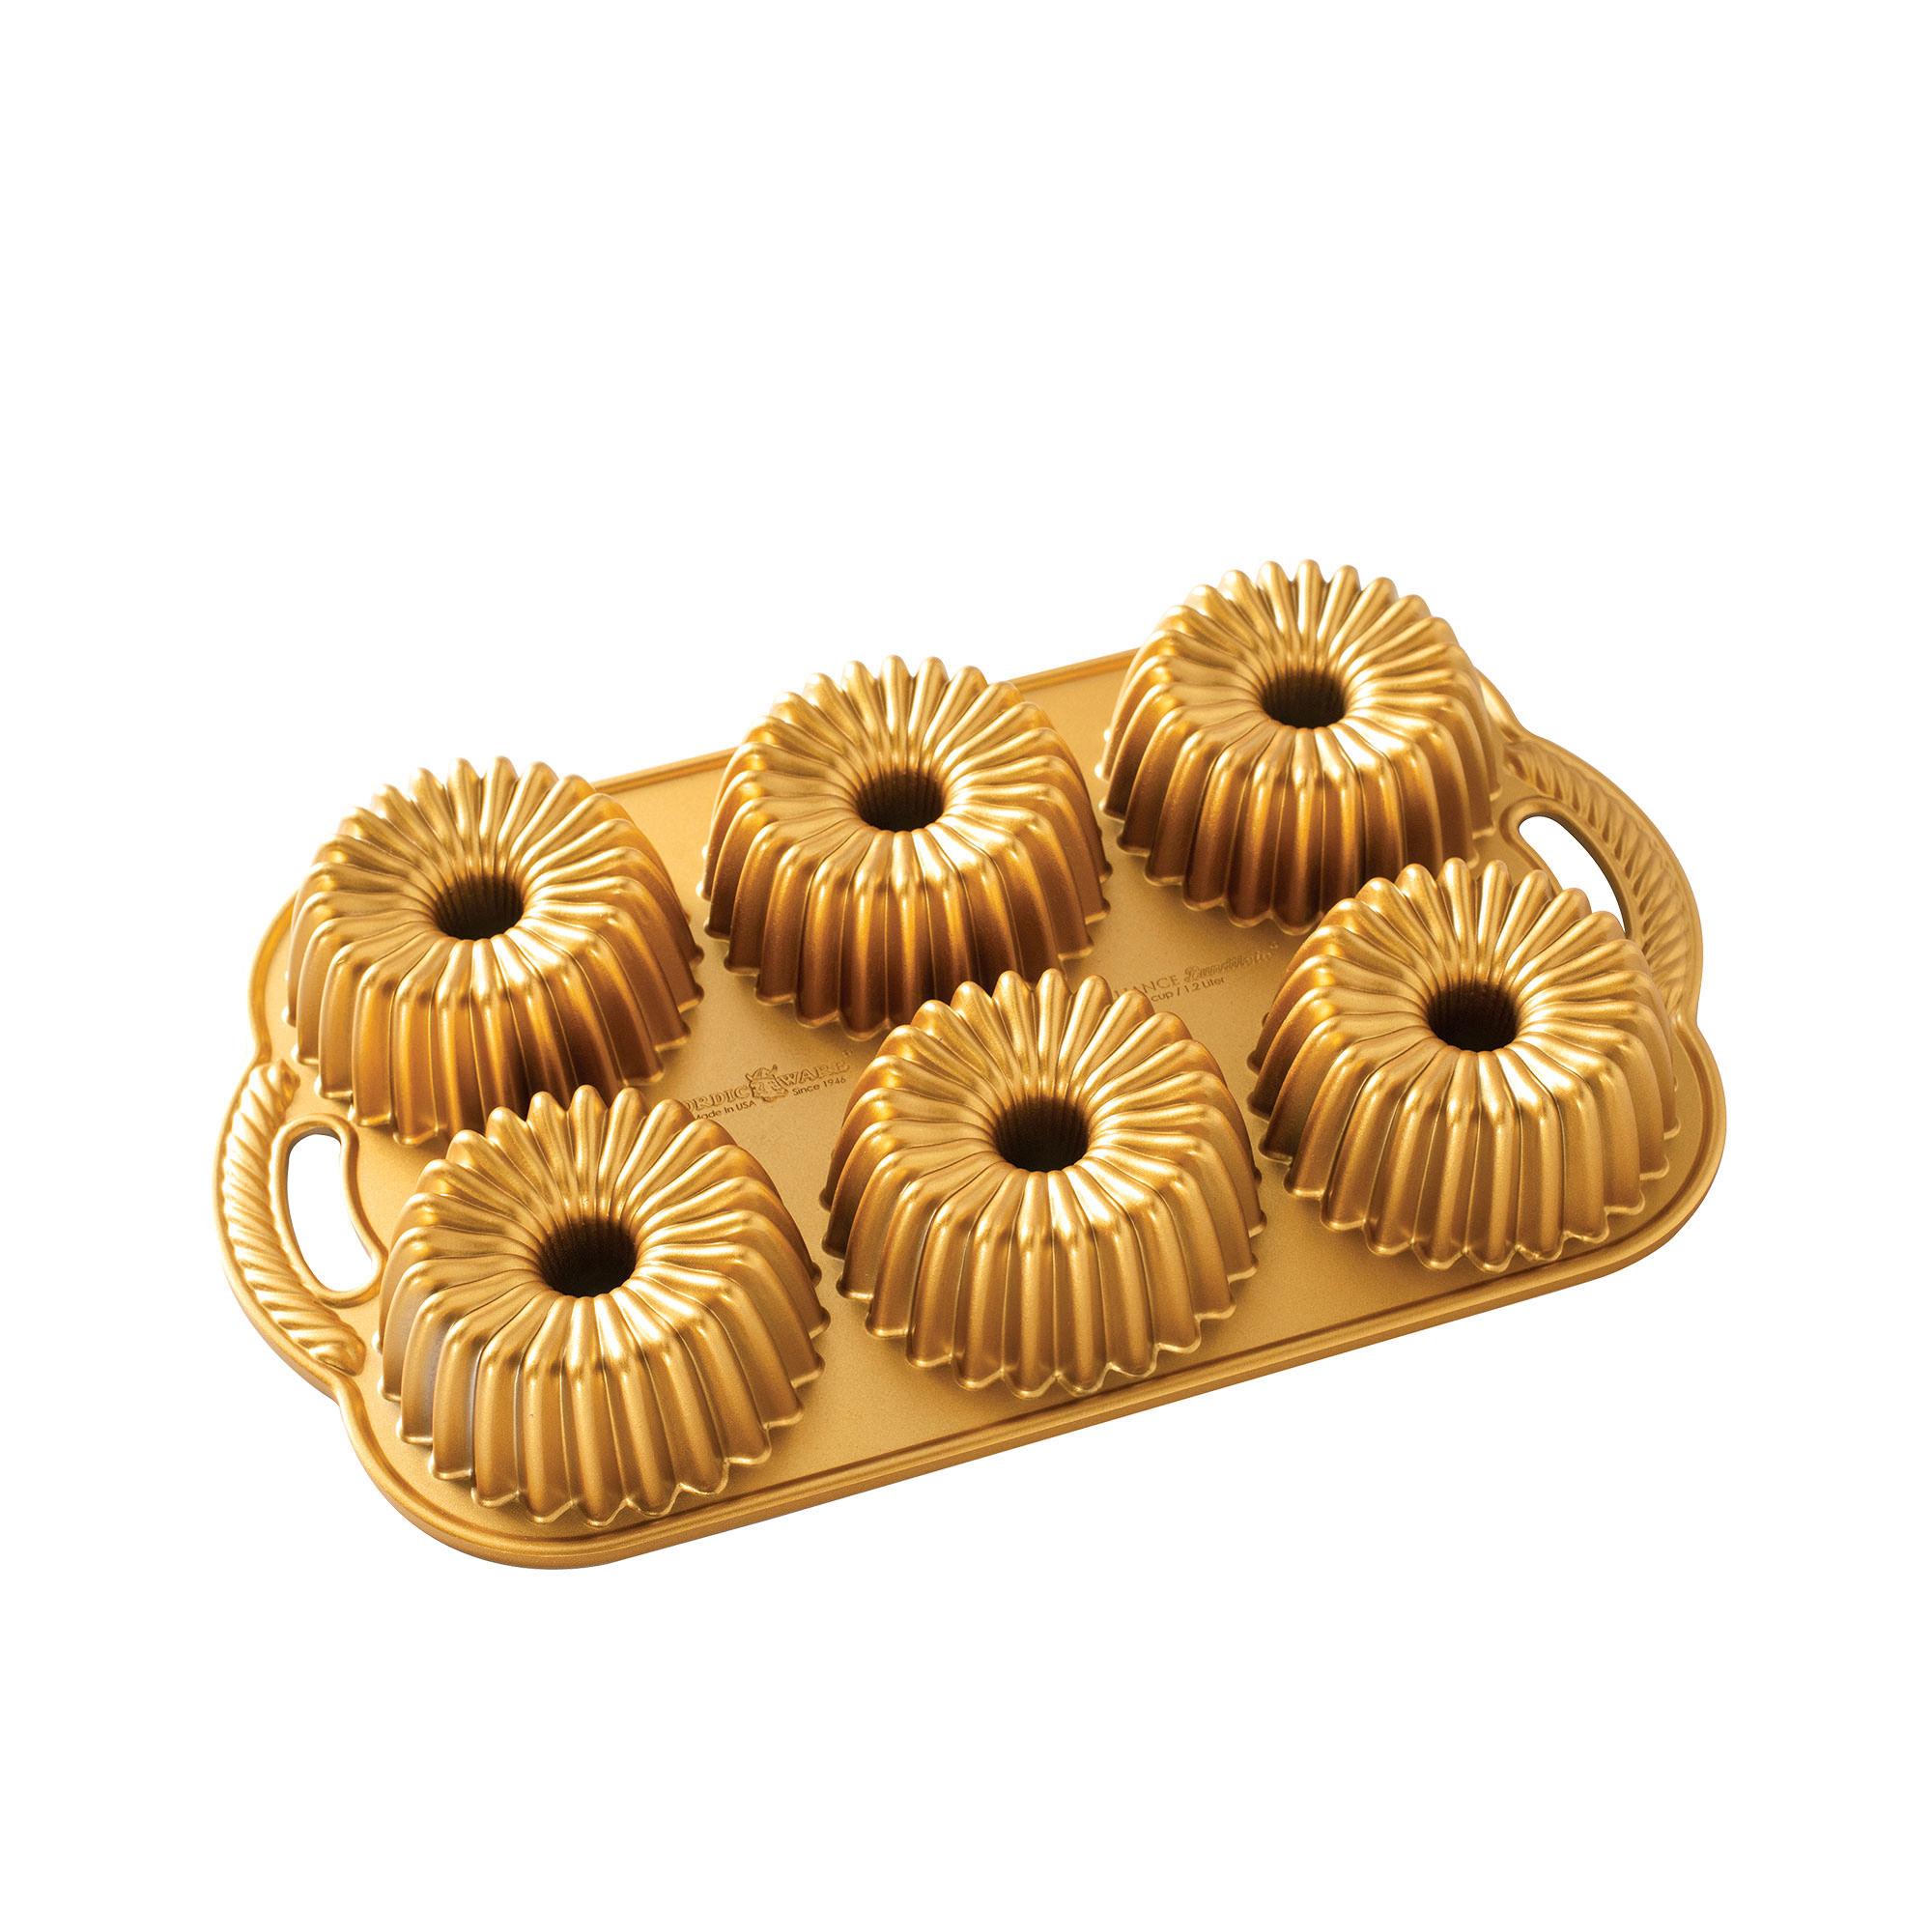 Nordic Ware Brilliance Bundtlette Muffin Pan 6 Cup Gold Image 3